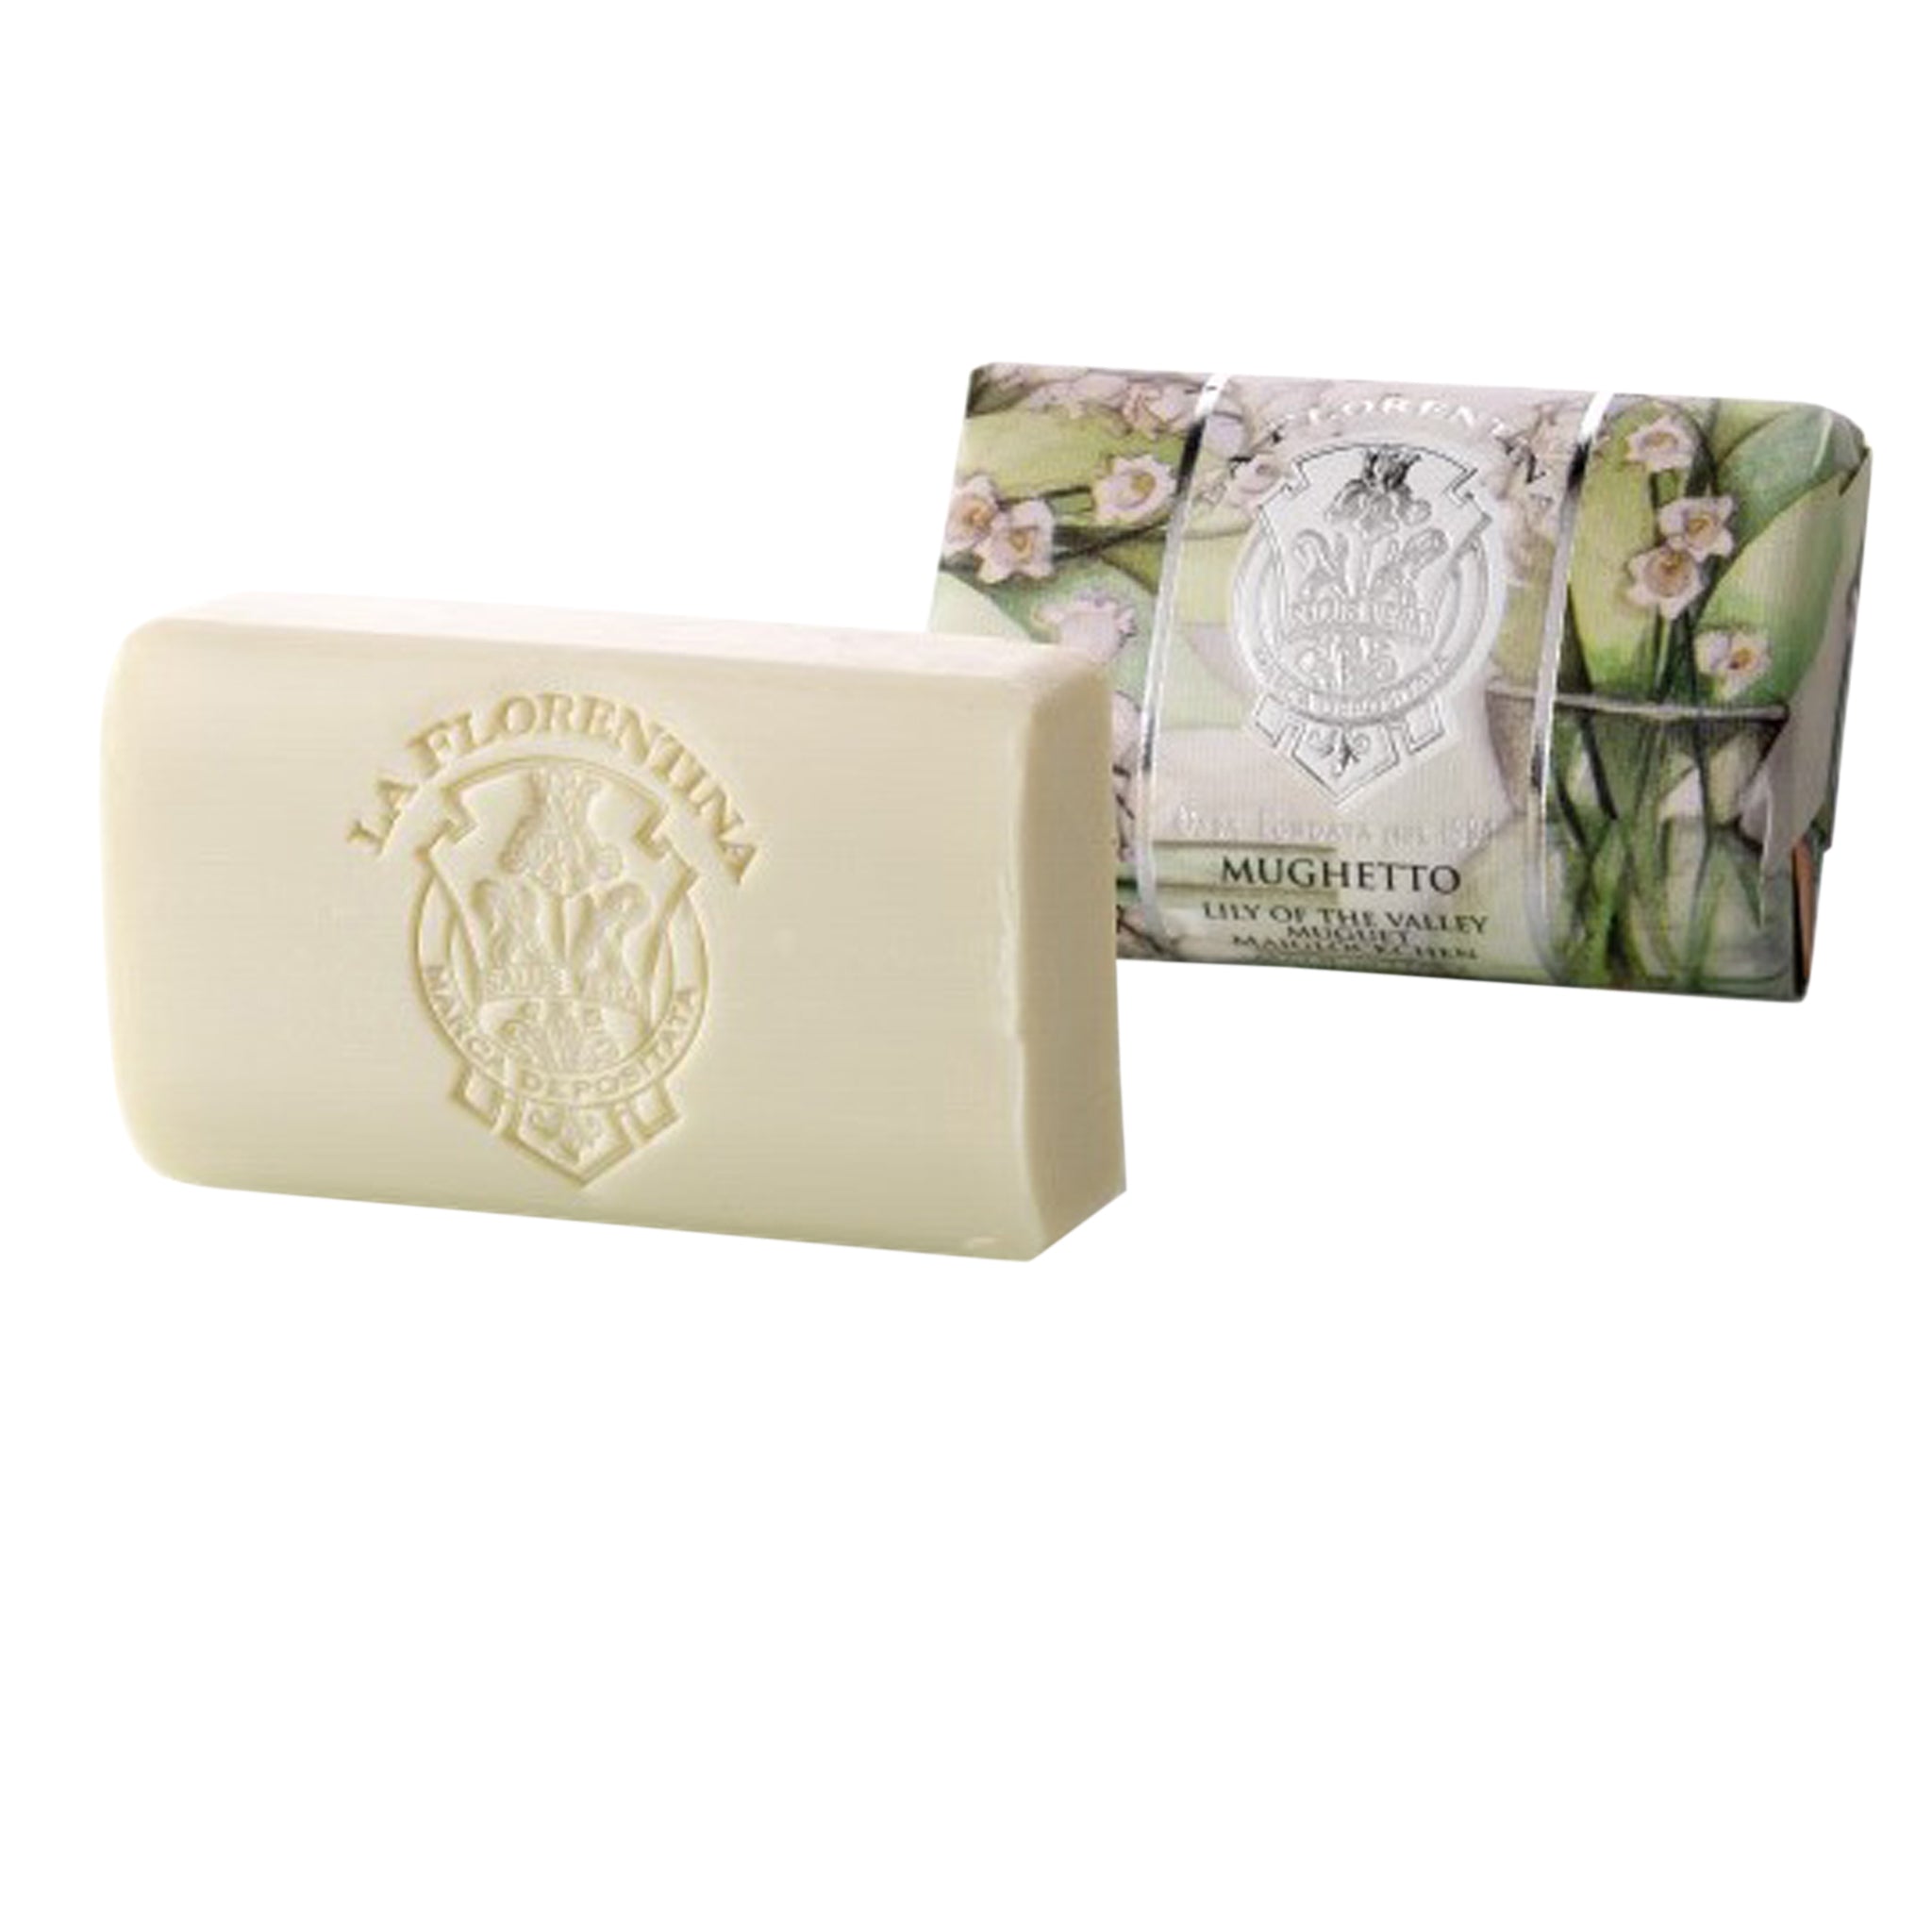 La Florentina Lily of the Valley 200g Bar Soap